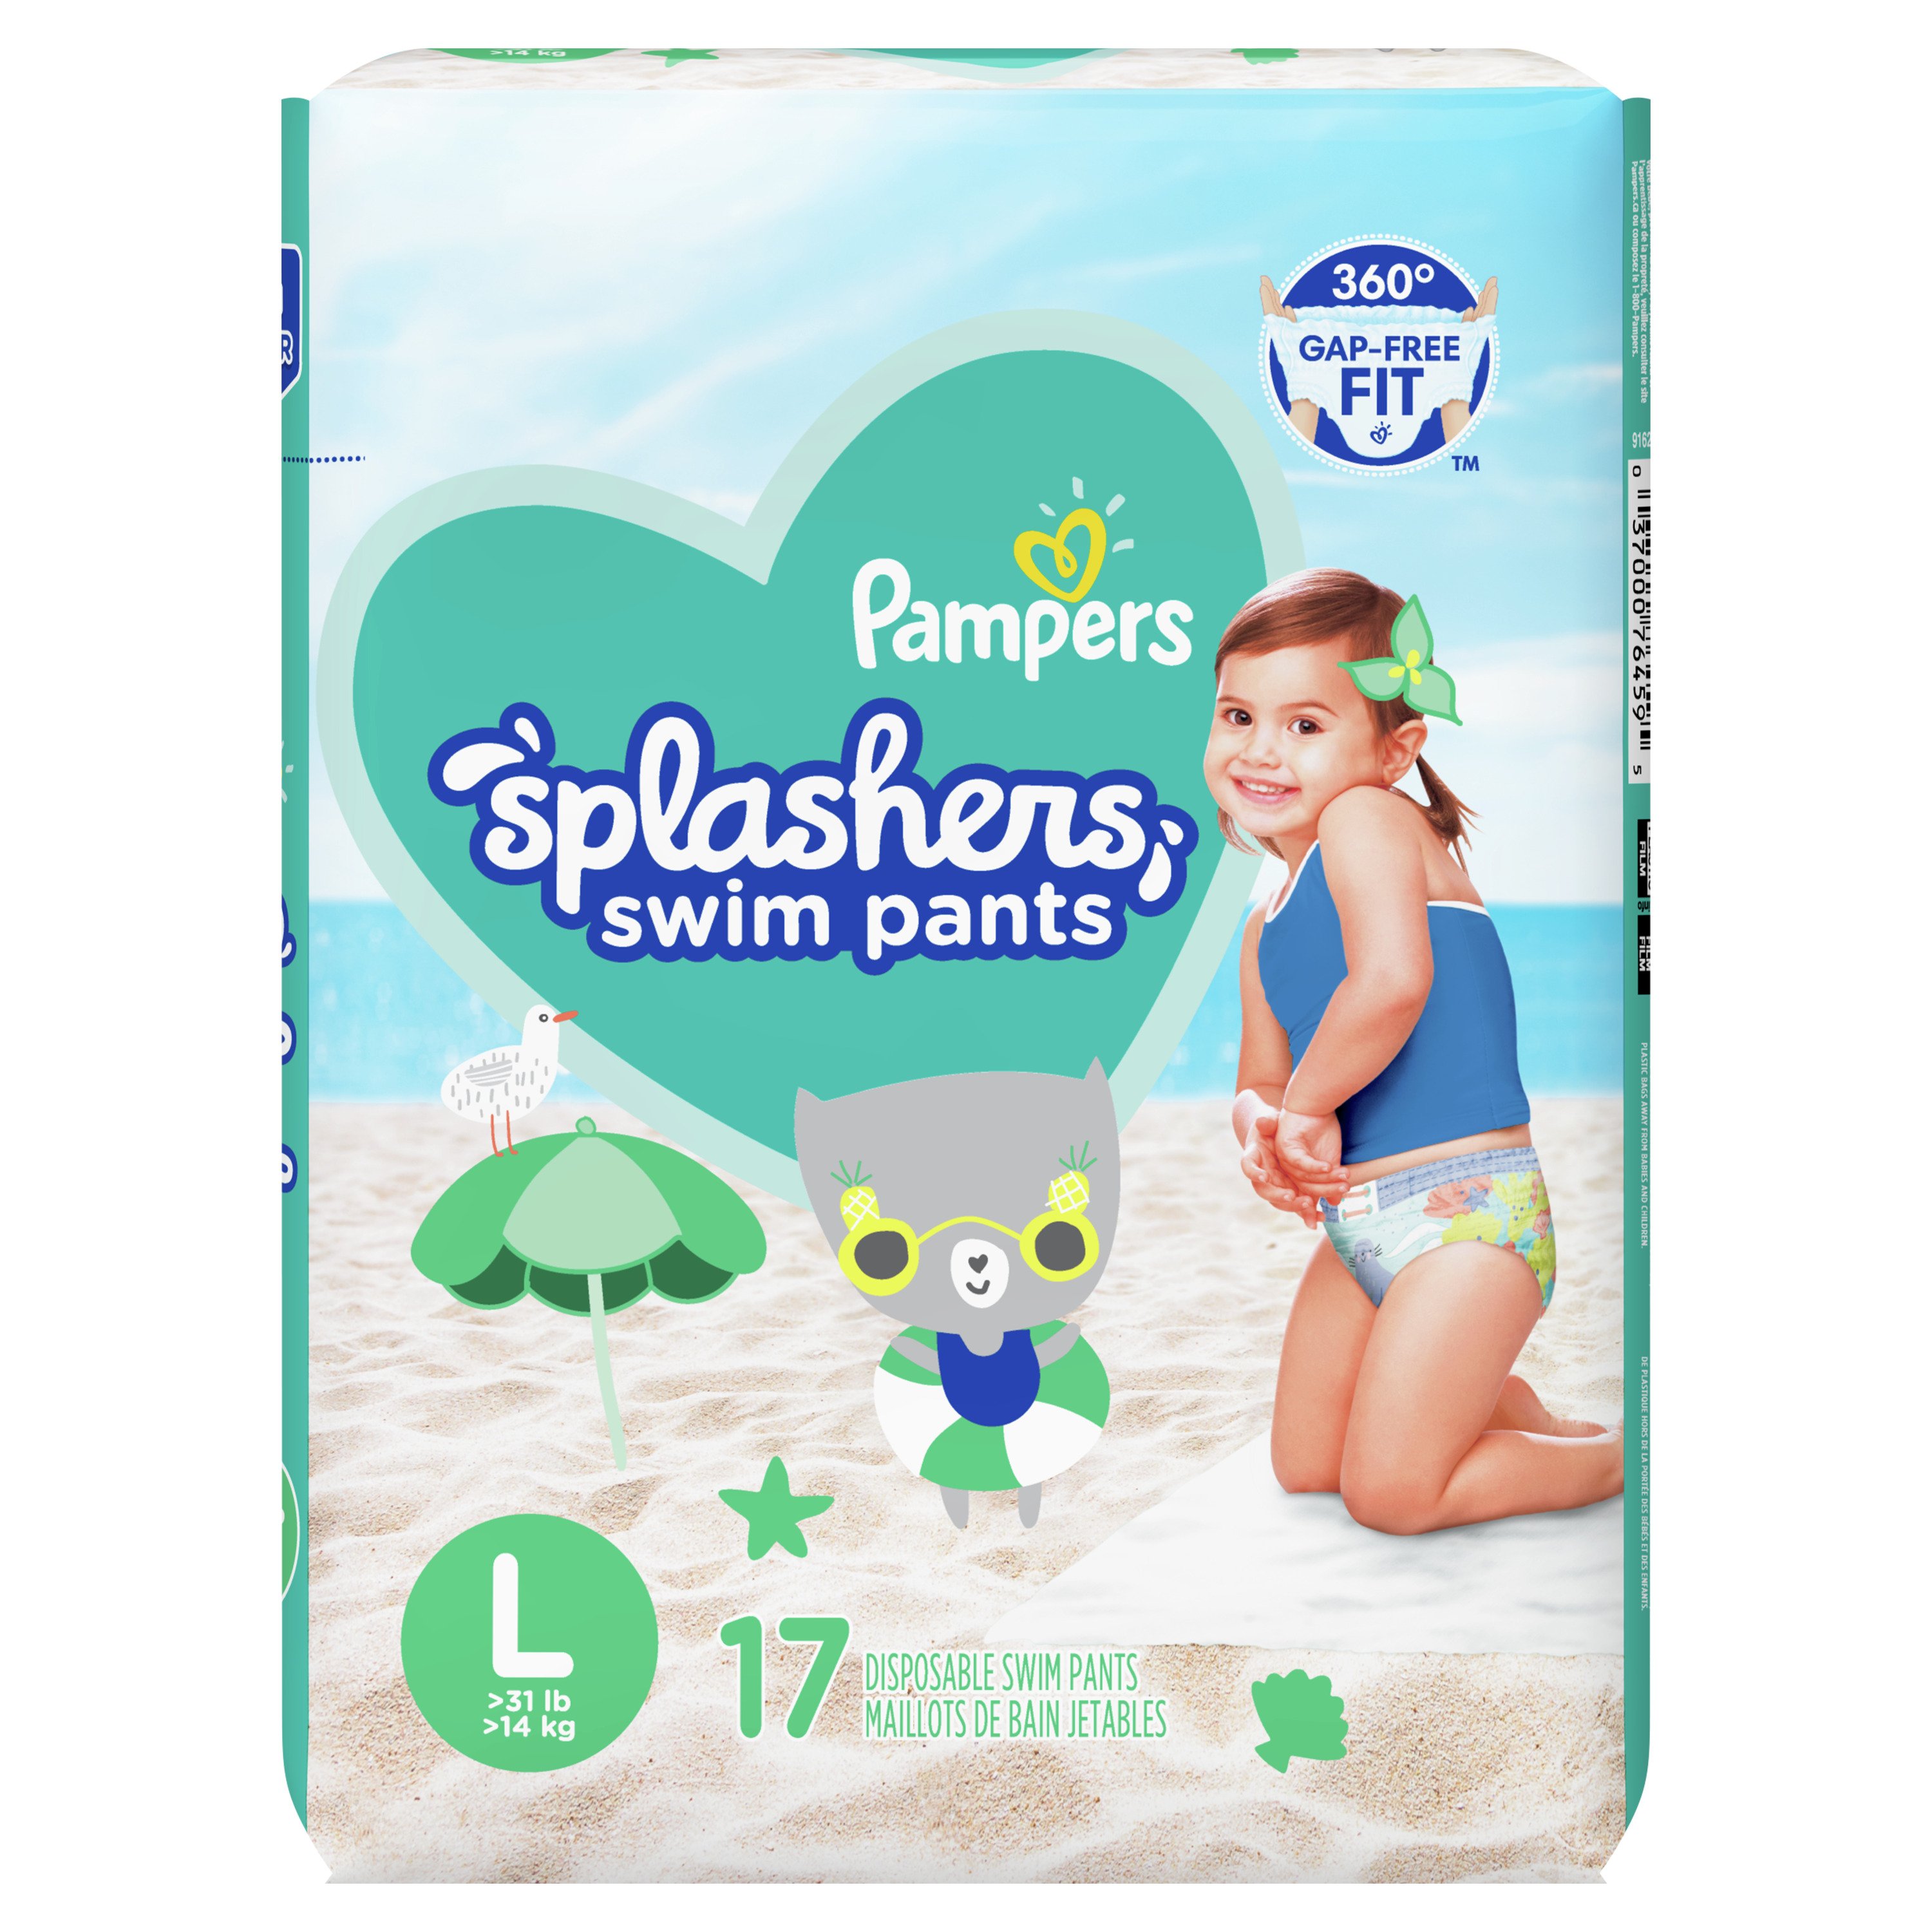 Pampers Splashers Swim Pants - Large - Shop Diapers at H-E-B